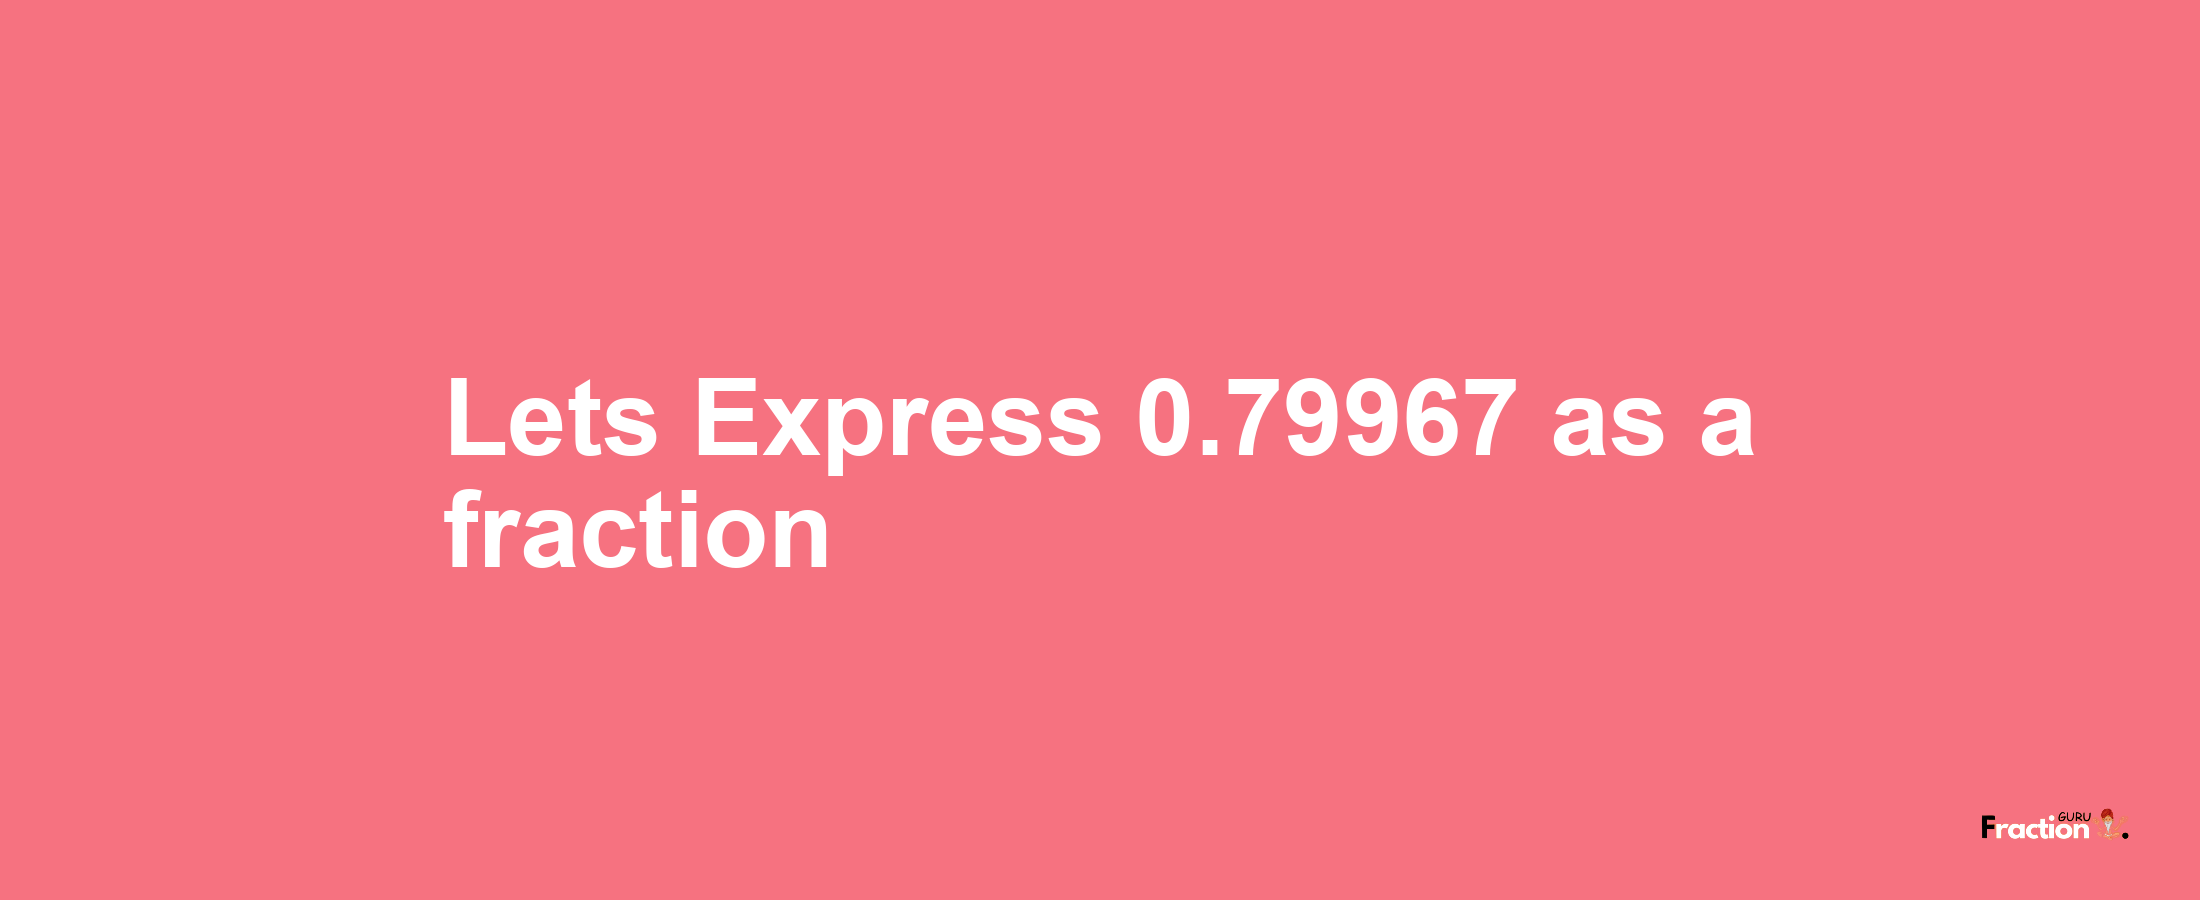 Lets Express 0.79967 as afraction